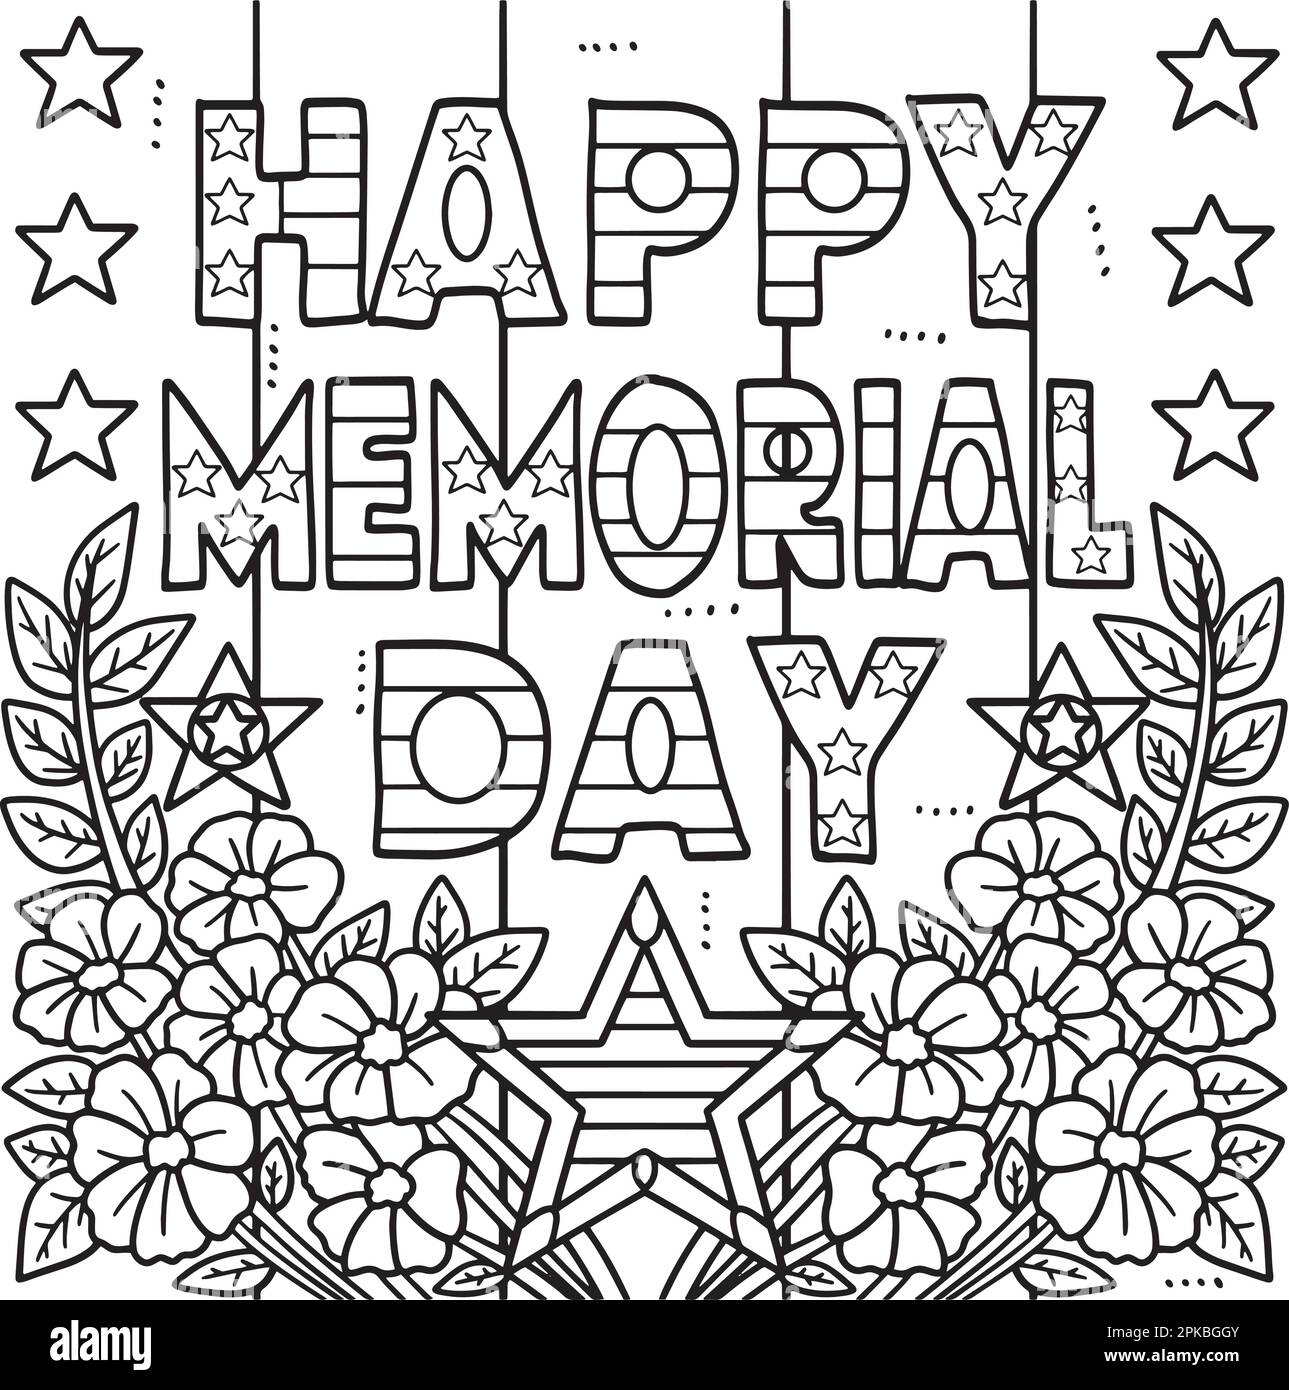 happy-memorial-day-coloring-page-for-kids-stock-vector-image-art-alamy